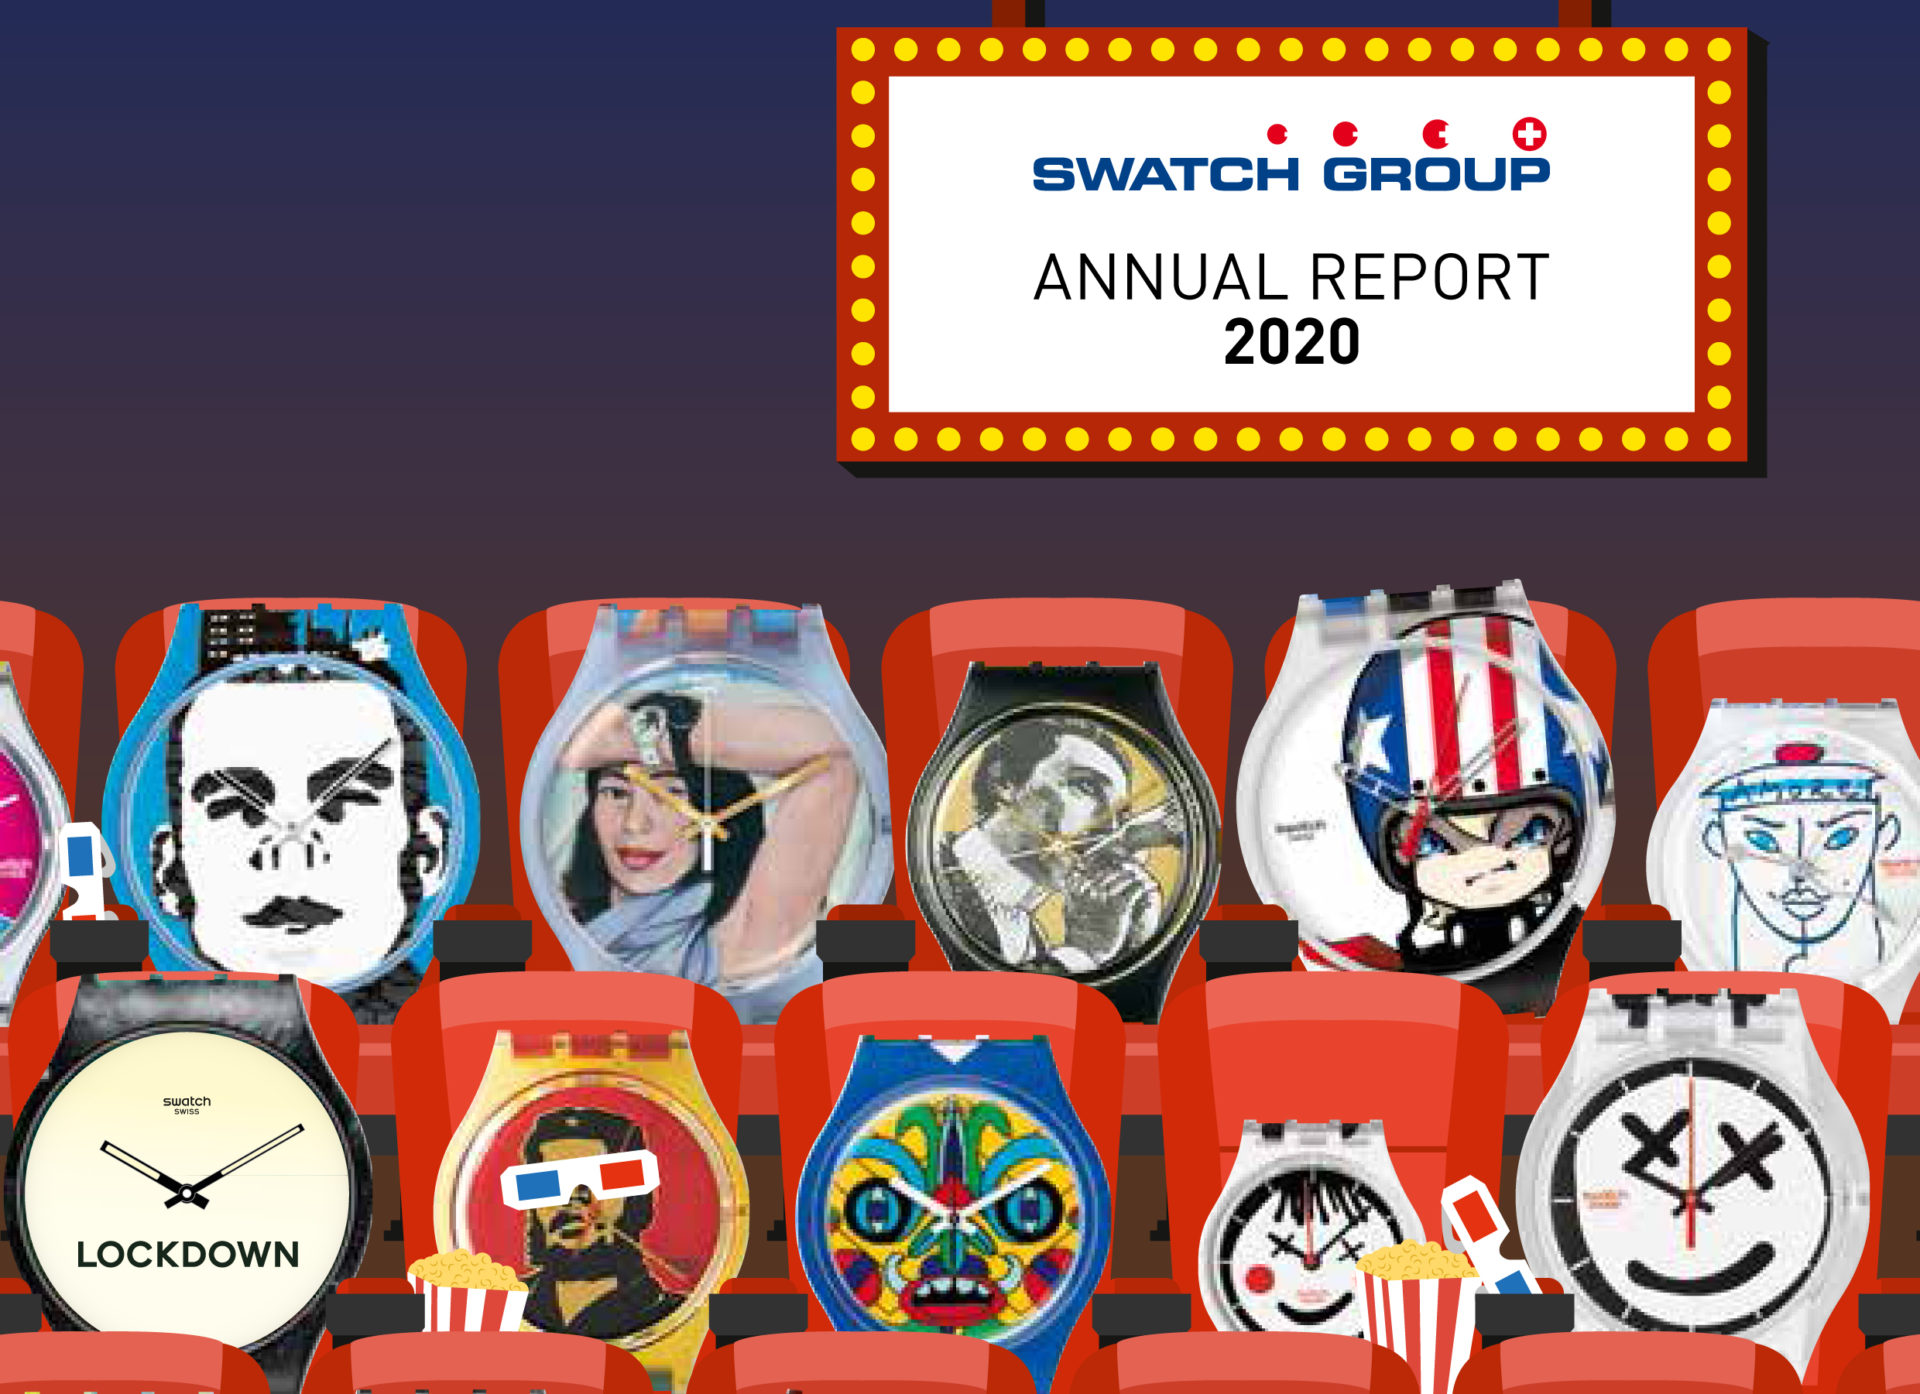 Swatch group annual report 2020